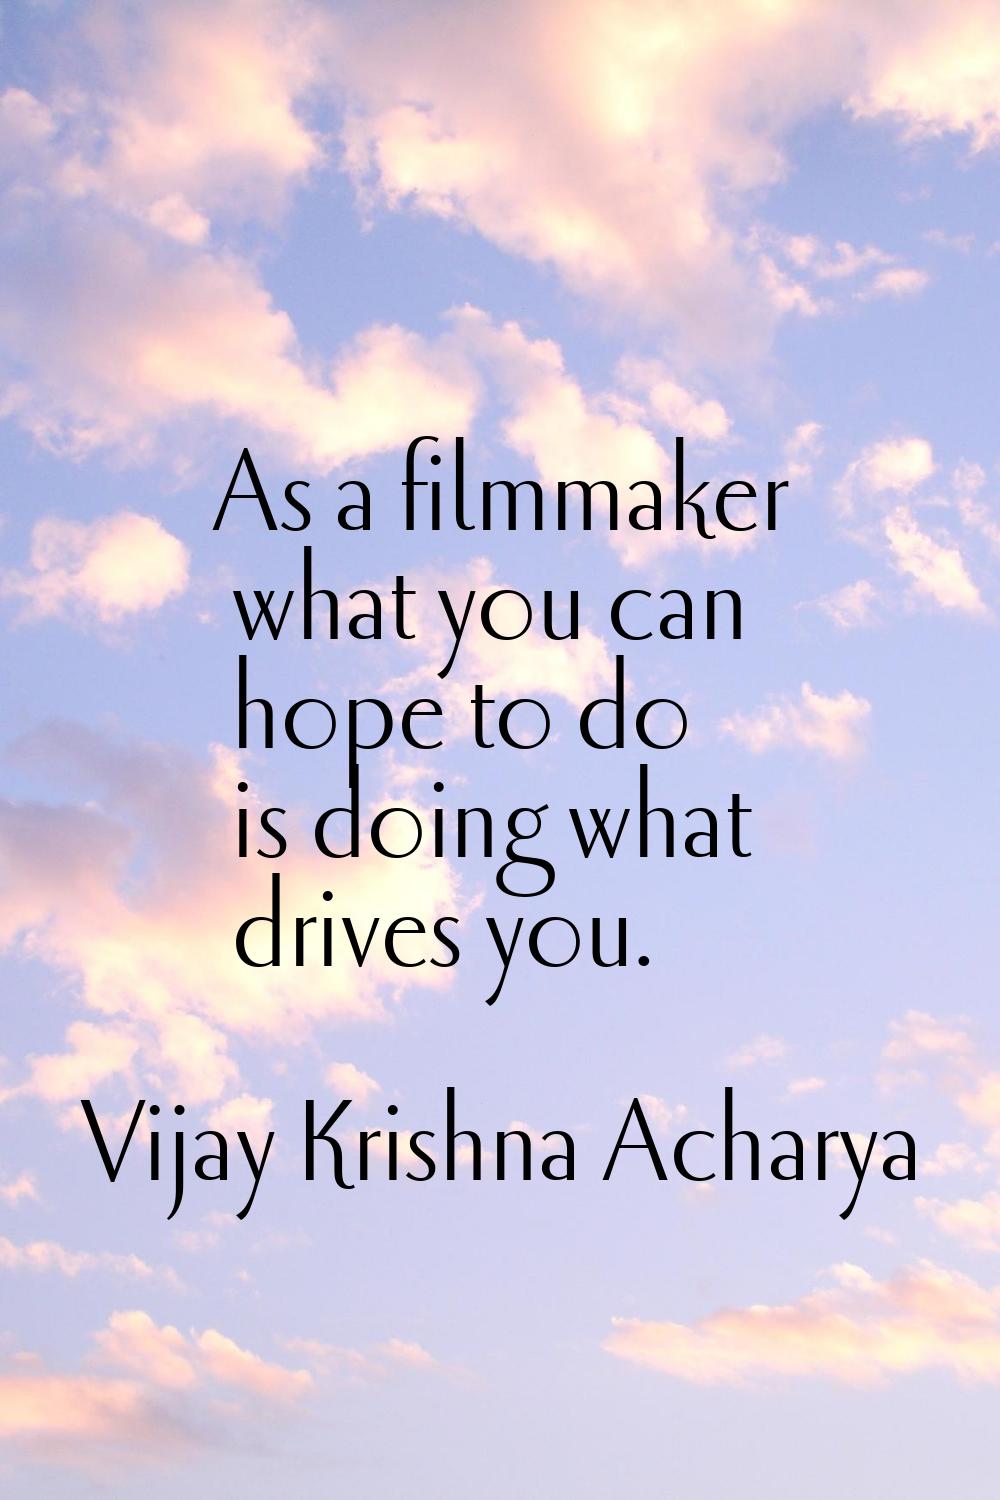 As a filmmaker what you can hope to do is doing what drives you.